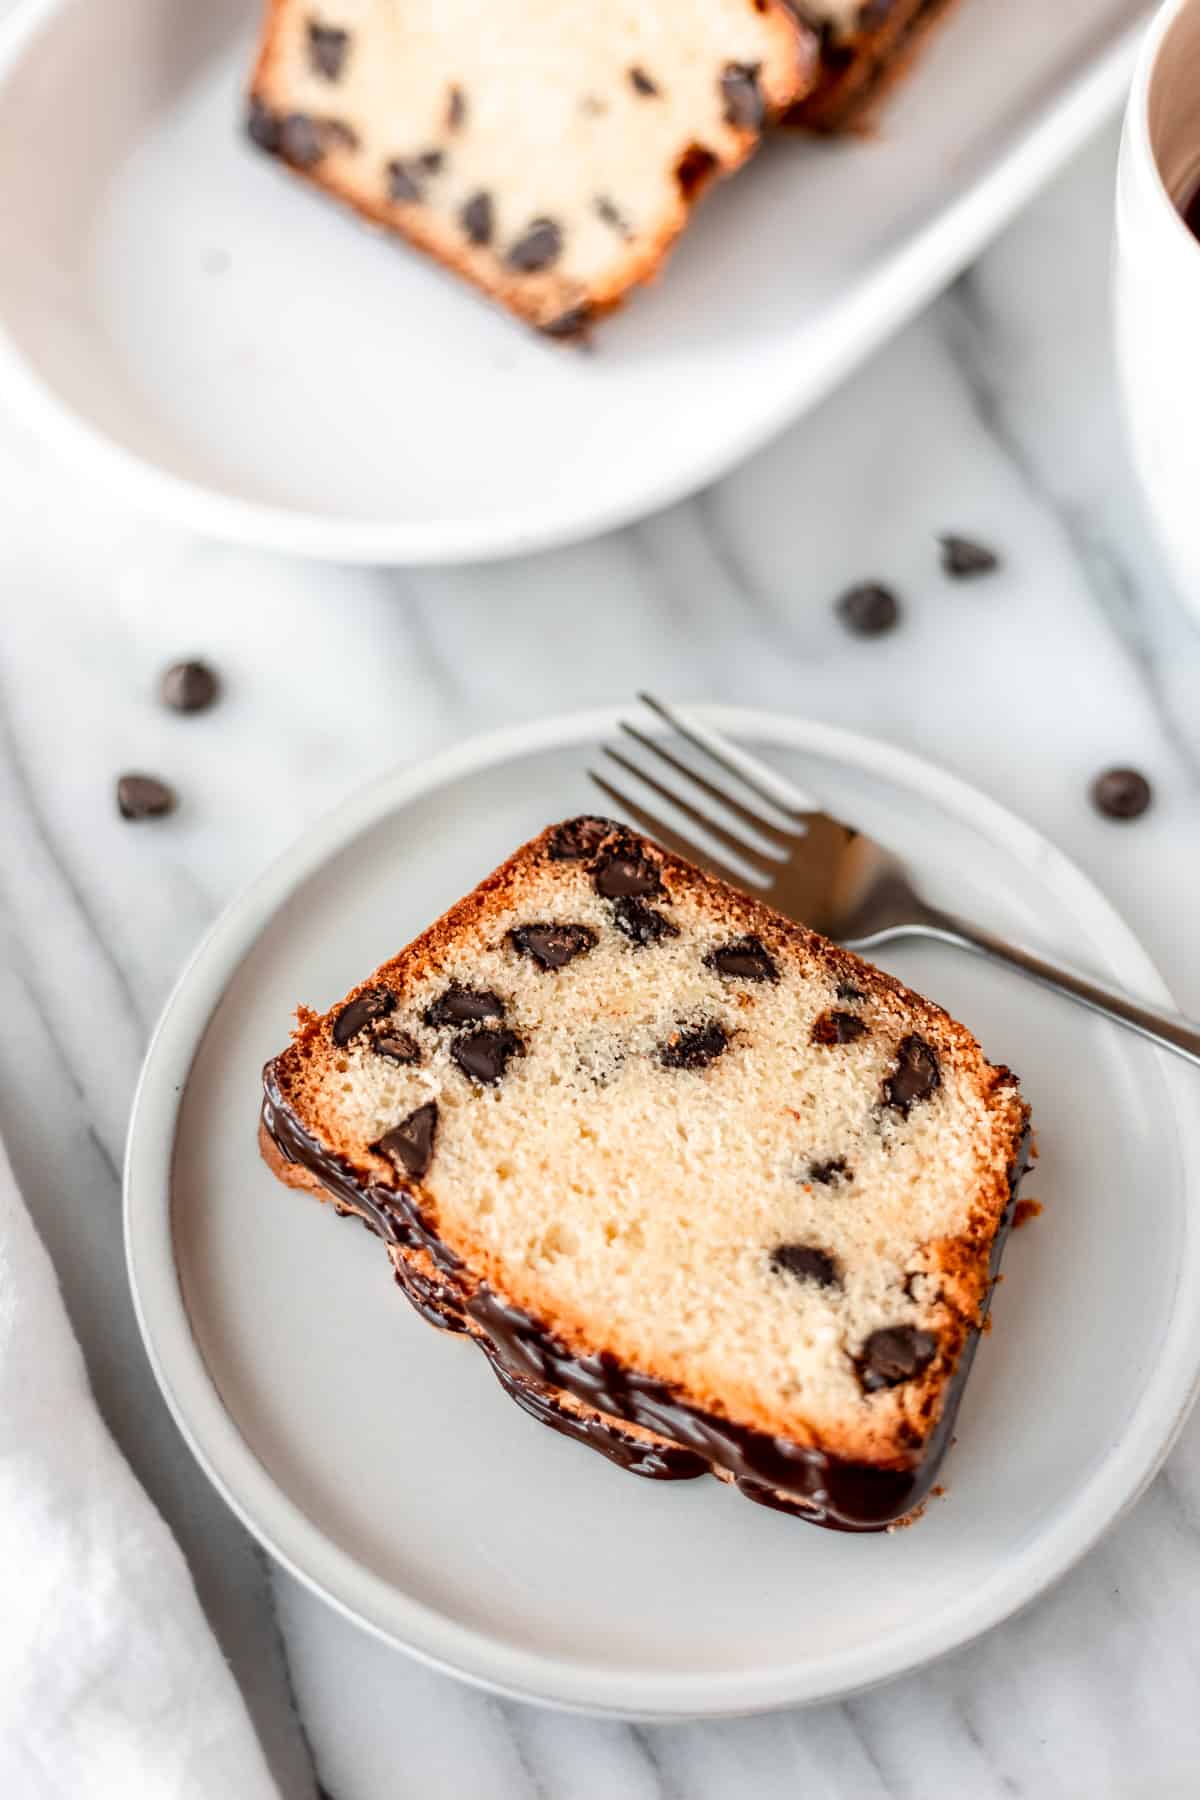 A slice of chocolate chip pound cake on a small white plate with a fork with chocolate chips and a serving tray of more pound cake partially showing around it.